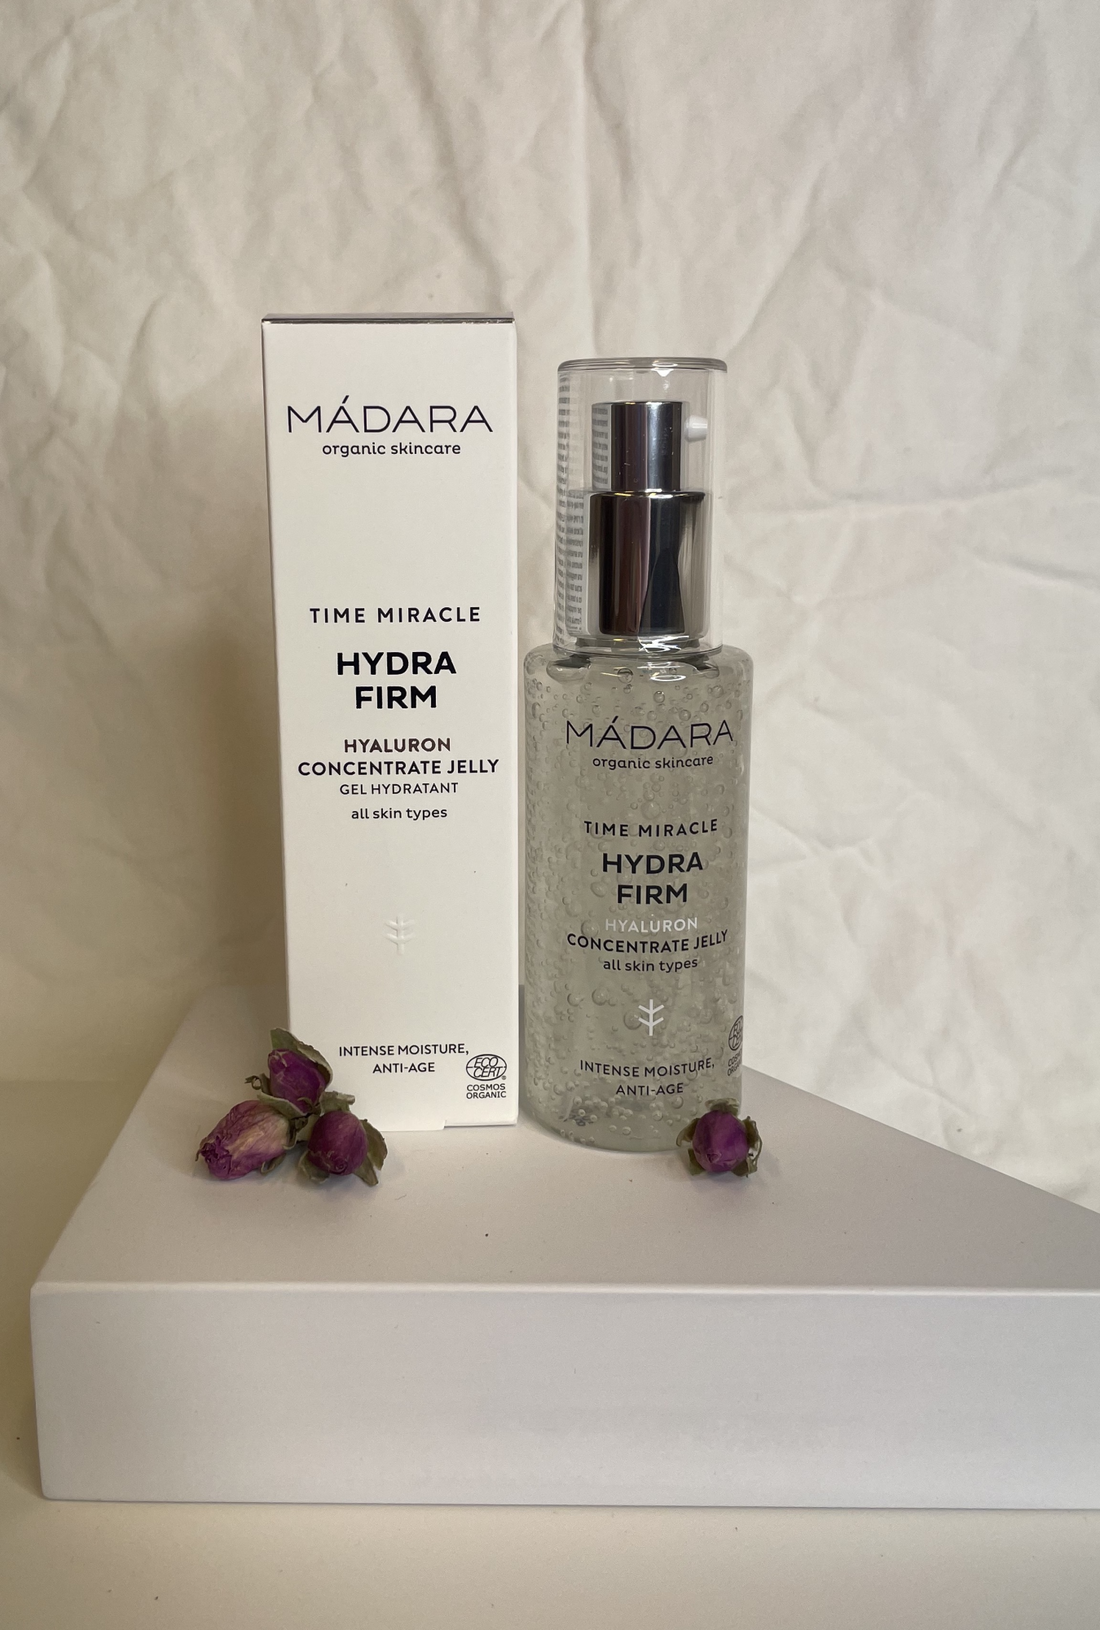 TIME MIRACLE Hydra Firm Hyaluron Concentrate Jelly